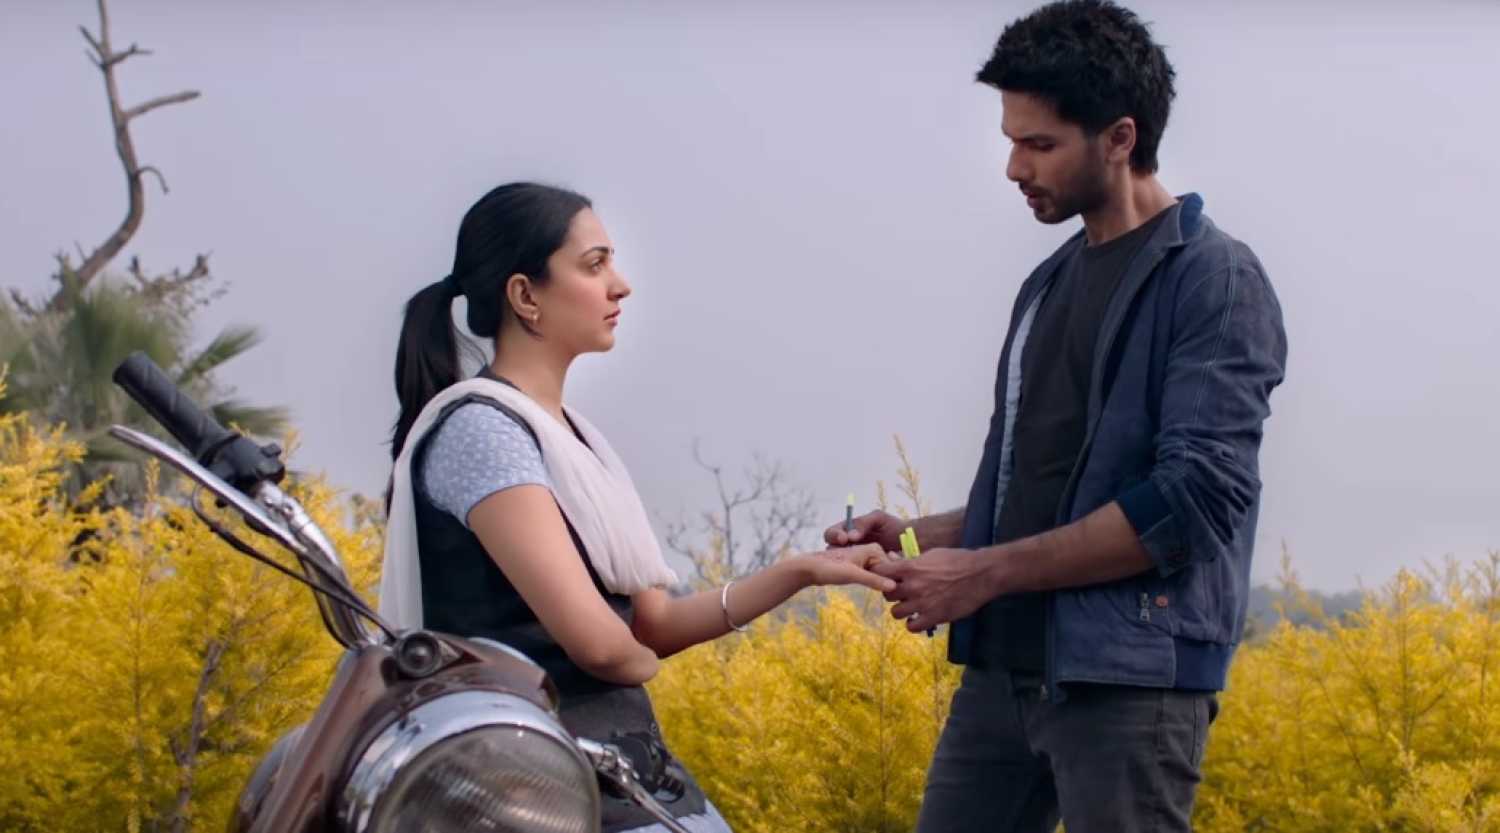 Kabir Singh 'Kaise Hua' song: Shahid Kapoor muses about love in this wonderful rock ballad